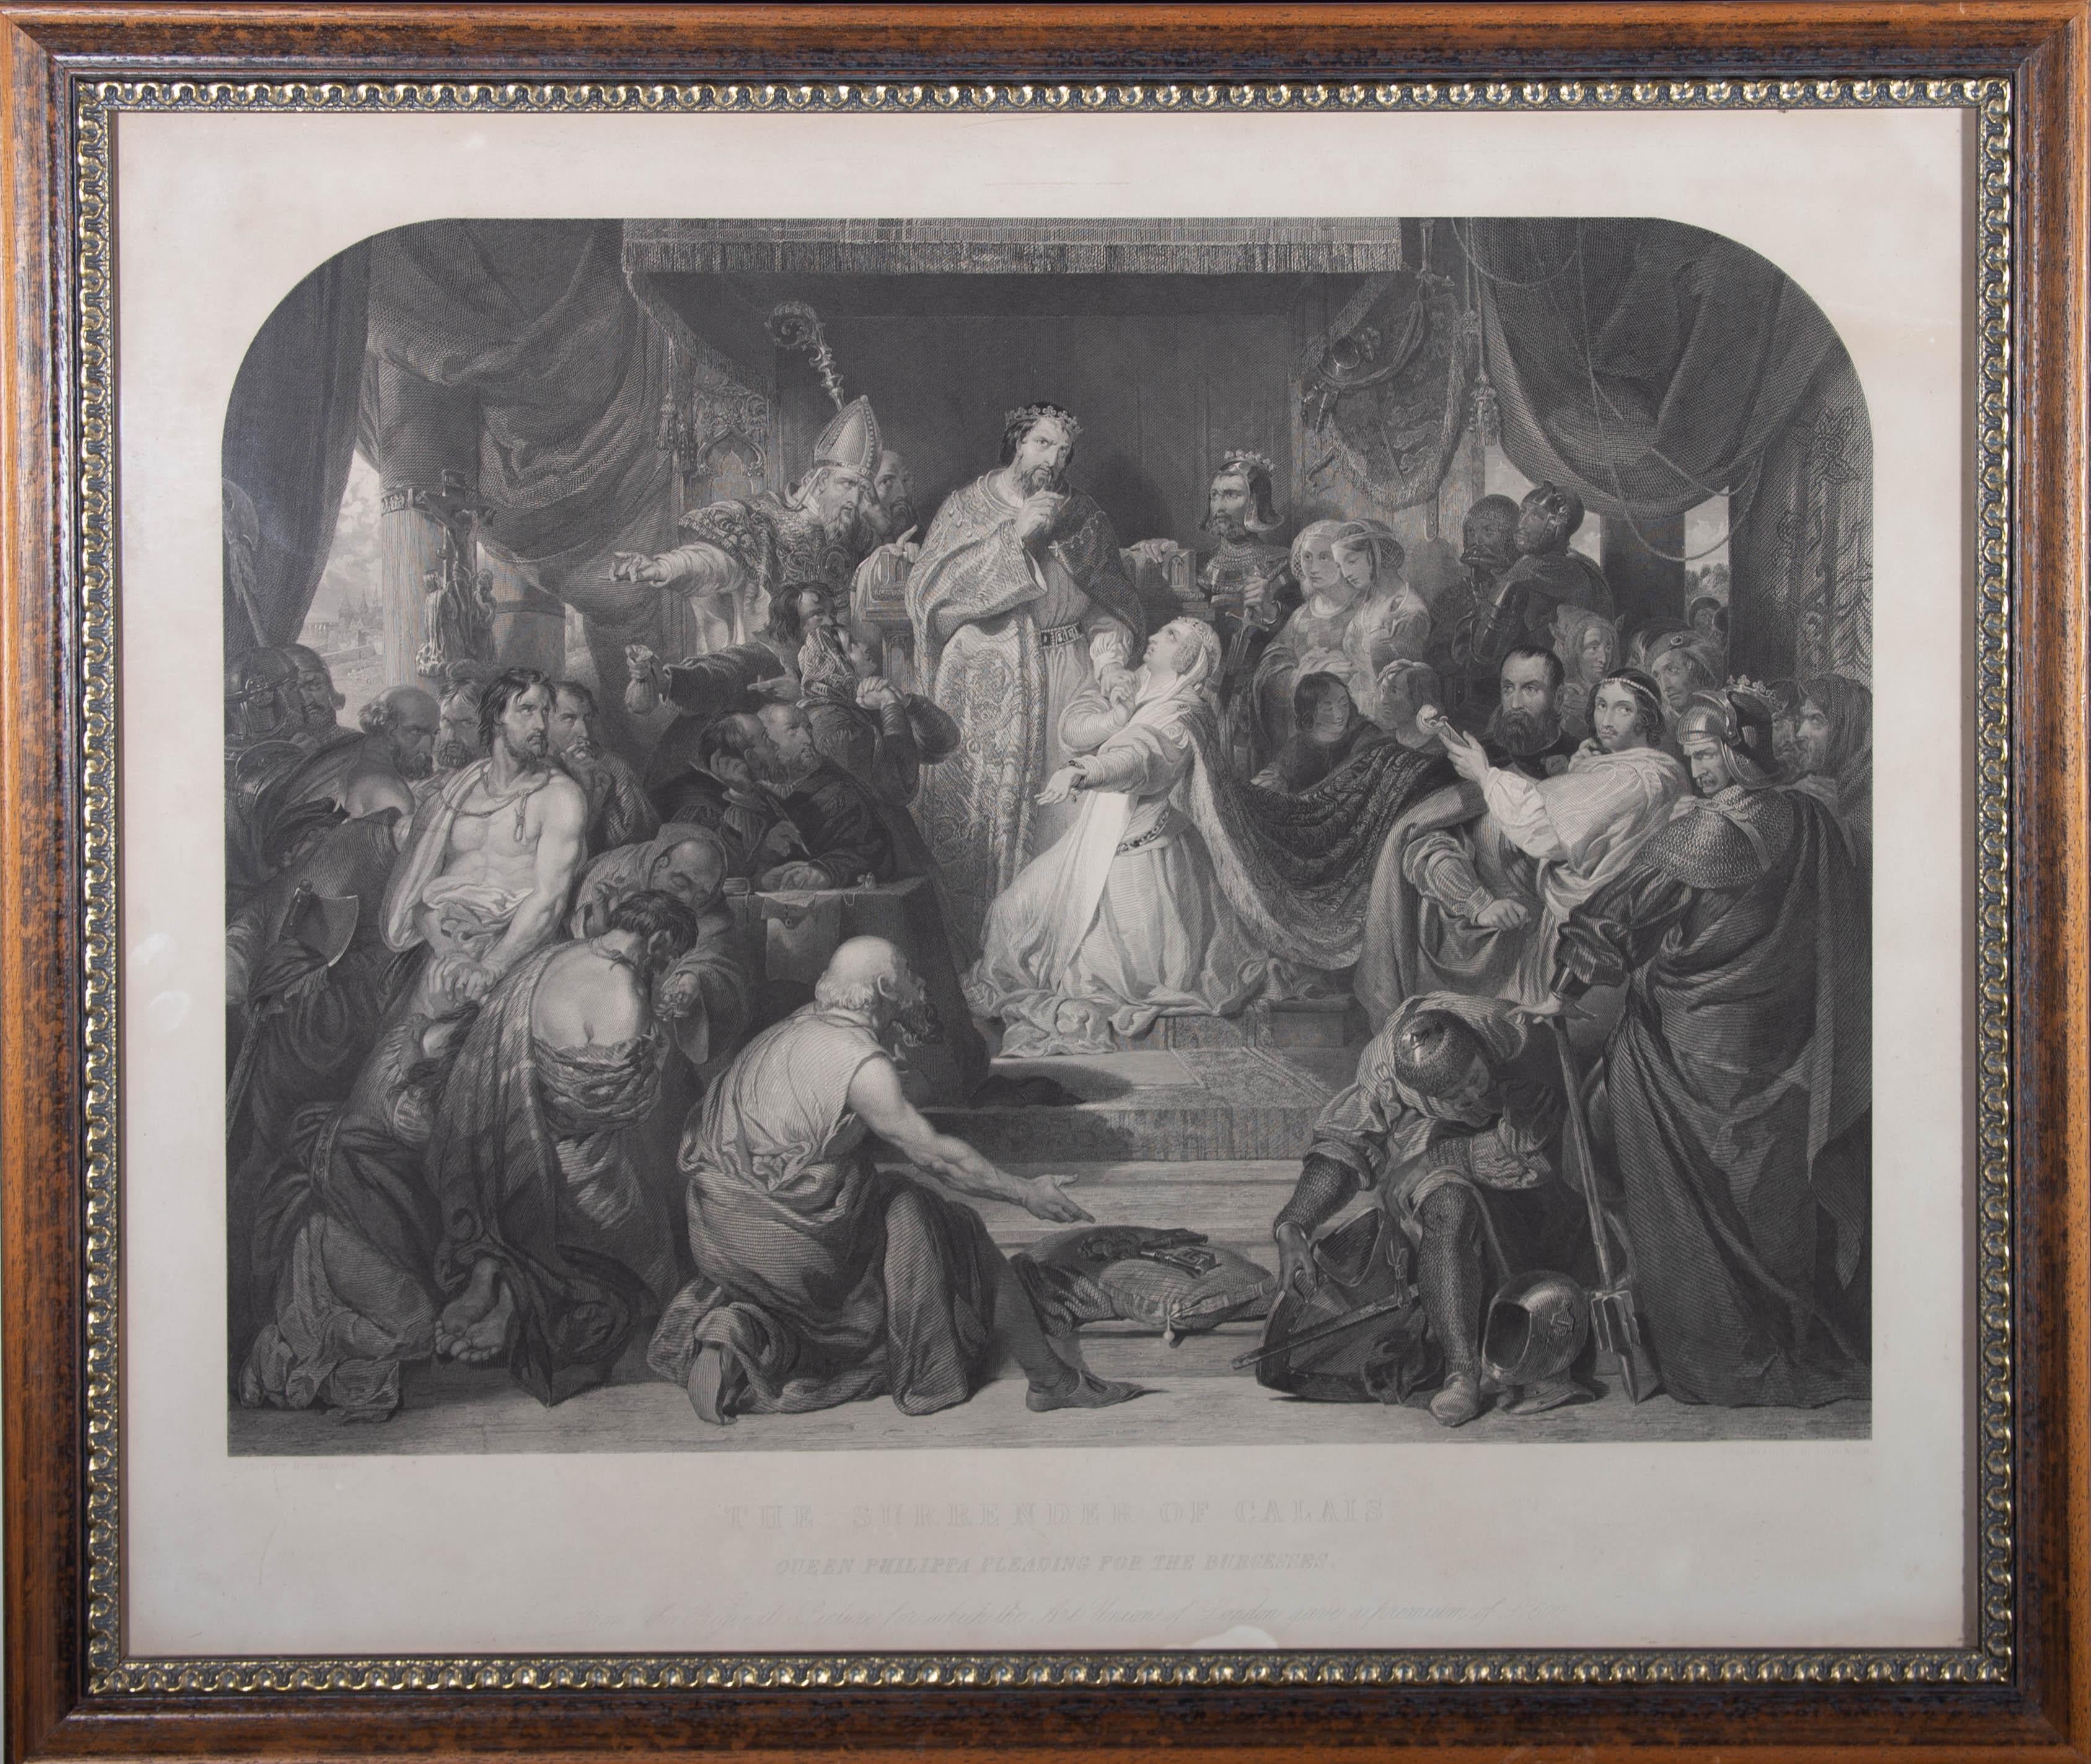 A fine 19th Century engraving showing a dramatic scene from the Hundred Year War, showing Queen Philippa pleading for the Burgesses. Philippa was a French princess who married Edward III of England in 1328. In 1347, during the early stages of the